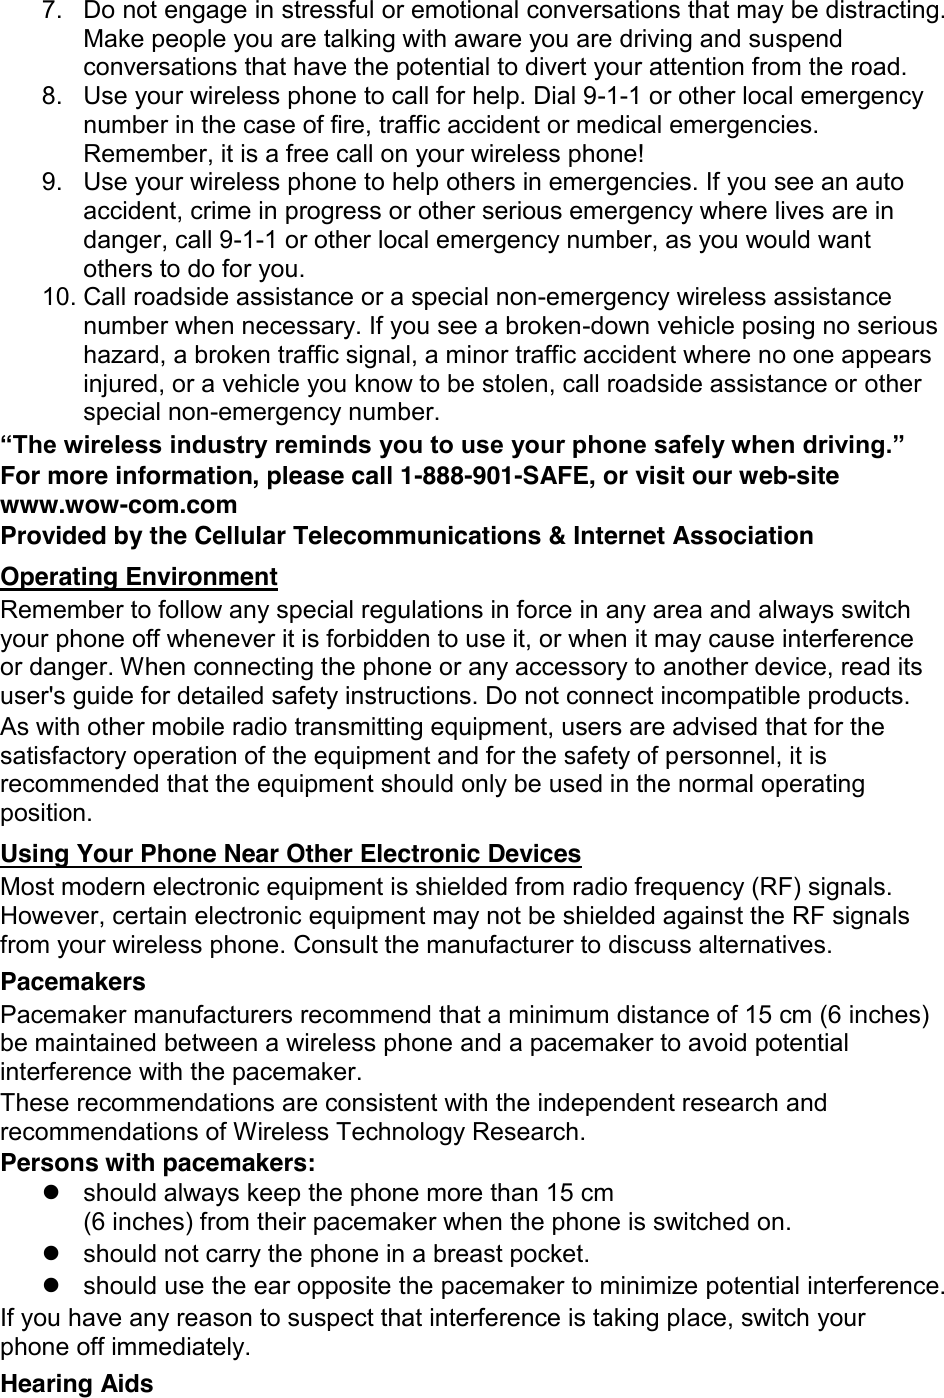 7.  Do not engage in stressful or emotional conversations that may be distracting. Make people you are talking with aware you are driving and suspend conversations that have the potential to divert your attention from the road. 8.  Use your wireless phone to call for help. Dial 9-1-1 or other local emergency number in the case of fire, traffic accident or medical emergencies. Remember, it is a free call on your wireless phone! 9.  Use your wireless phone to help others in emergencies. If you see an auto accident, crime in progress or other serious emergency where lives are in danger, call 9-1-1 or other local emergency number, as you would want others to do for you. 10. Call roadside assistance or a special non-emergency wireless assistance number when necessary. If you see a broken-down vehicle posing no serious hazard, a broken traffic signal, a minor traffic accident where no one appears injured, or a vehicle you know to be stolen, call roadside assistance or other special non-emergency number. “Thewirelessindustryremindsyoutouseyourphonesafelywhendriving.” For more information, please call 1-888-901-SAFE, or visit our web-site www.wow-com.com Provided by the Cellular Telecommunications &amp; Internet Association Operating Environment Remember to follow any special regulations in force in any area and always switch your phone off whenever it is forbidden to use it, or when it may cause interference or danger. When connecting the phone or any accessory to another device, read its user&apos;s guide for detailed safety instructions. Do not connect incompatible products. As with other mobile radio transmitting equipment, users are advised that for the satisfactory operation of the equipment and for the safety of personnel, it is recommended that the equipment should only be used in the normal operating position. Using Your Phone Near Other Electronic Devices Most modern electronic equipment is shielded from radio frequency (RF) signals. However, certain electronic equipment may not be shielded against the RF signals from your wireless phone. Consult the manufacturer to discuss alternatives. Pacemakers Pacemaker manufacturers recommend that a minimum distance of 15 cm (6 inches) be maintained between a wireless phone and a pacemaker to avoid potential interference with the pacemaker. These recommendations are consistent with the independent research and recommendations of Wireless Technology Research. Persons with pacemakers:   should always keep the phone more than 15 cm   (6 inches) from their pacemaker when the phone is switched on.   should not carry the phone in a breast pocket.   should use the ear opposite the pacemaker to minimize potential interference. If you have any reason to suspect that interference is taking place, switch your phone off immediately. Hearing Aids 